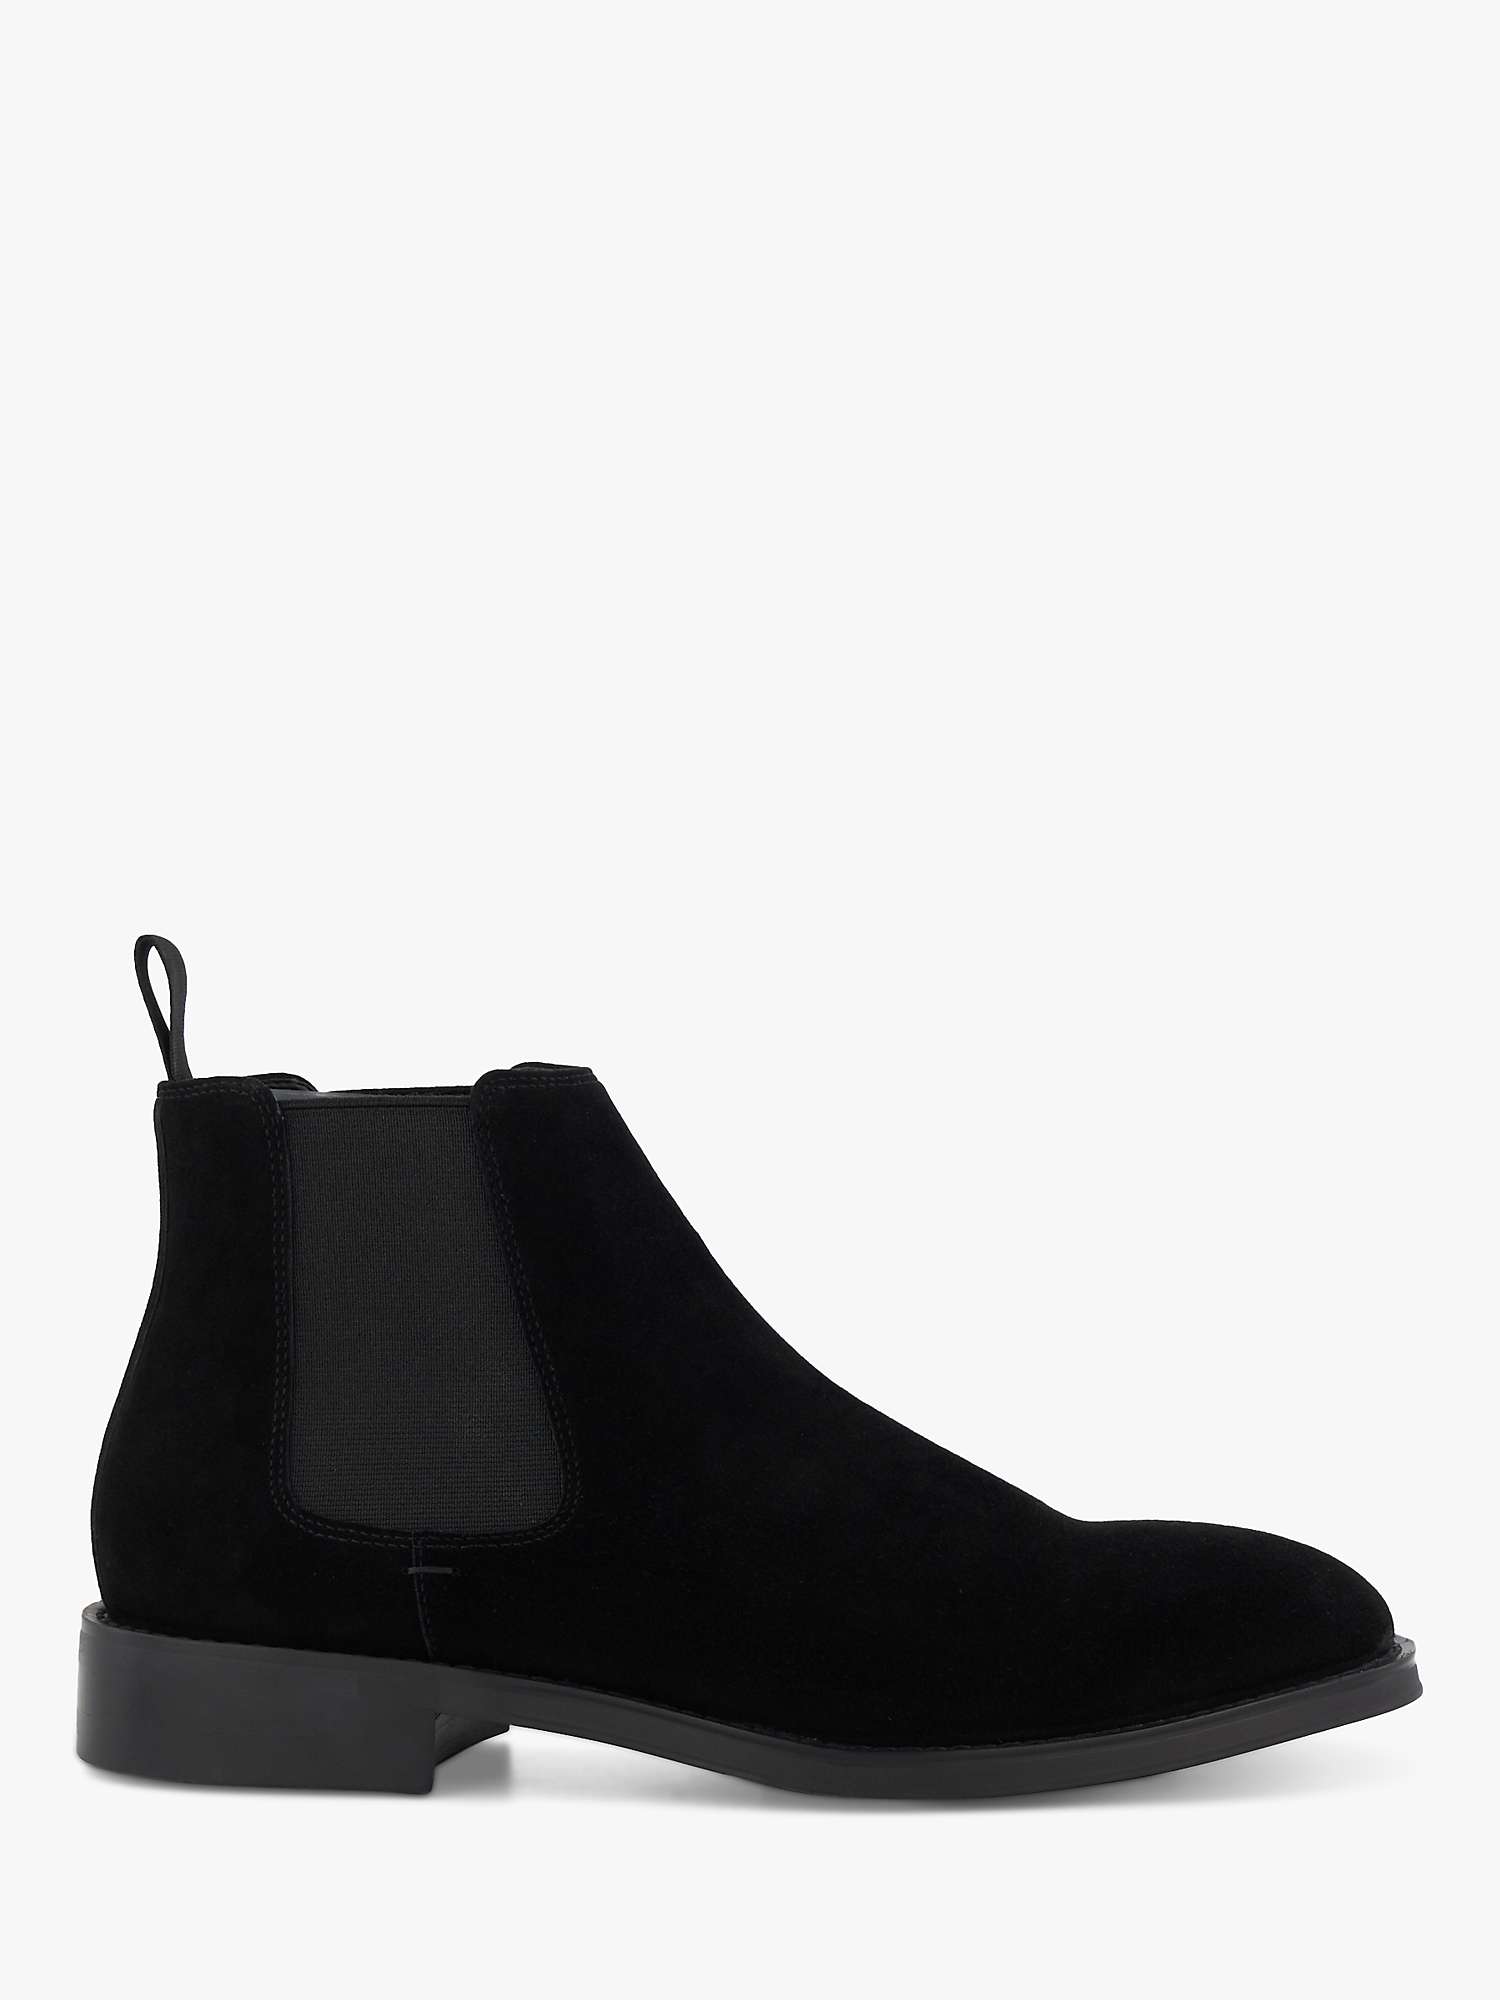 Buy Dune Masons Suede Chelsea Boots Online at johnlewis.com